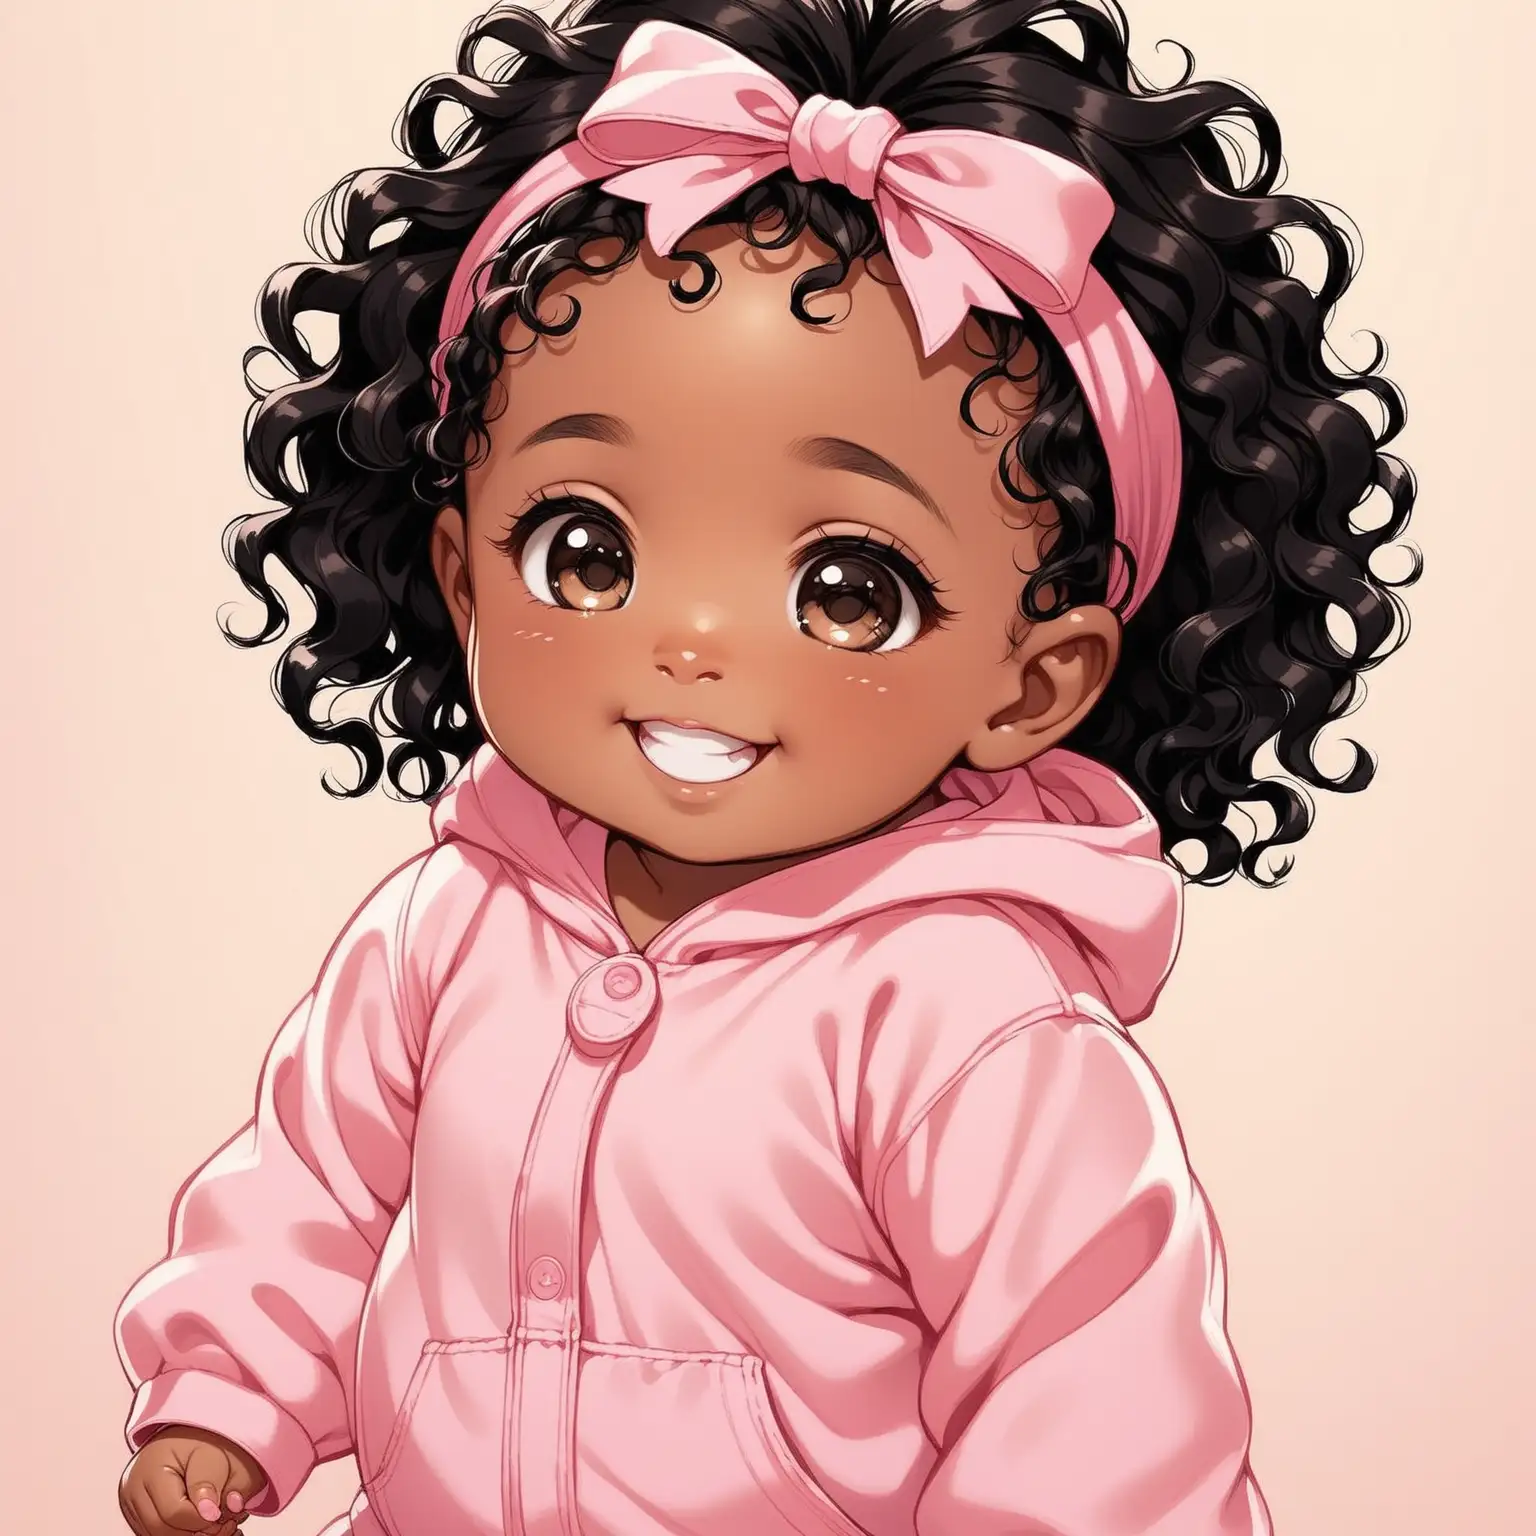 Cheerful African American Baby Girl with Curly Hair in Pink Outfit Smiling